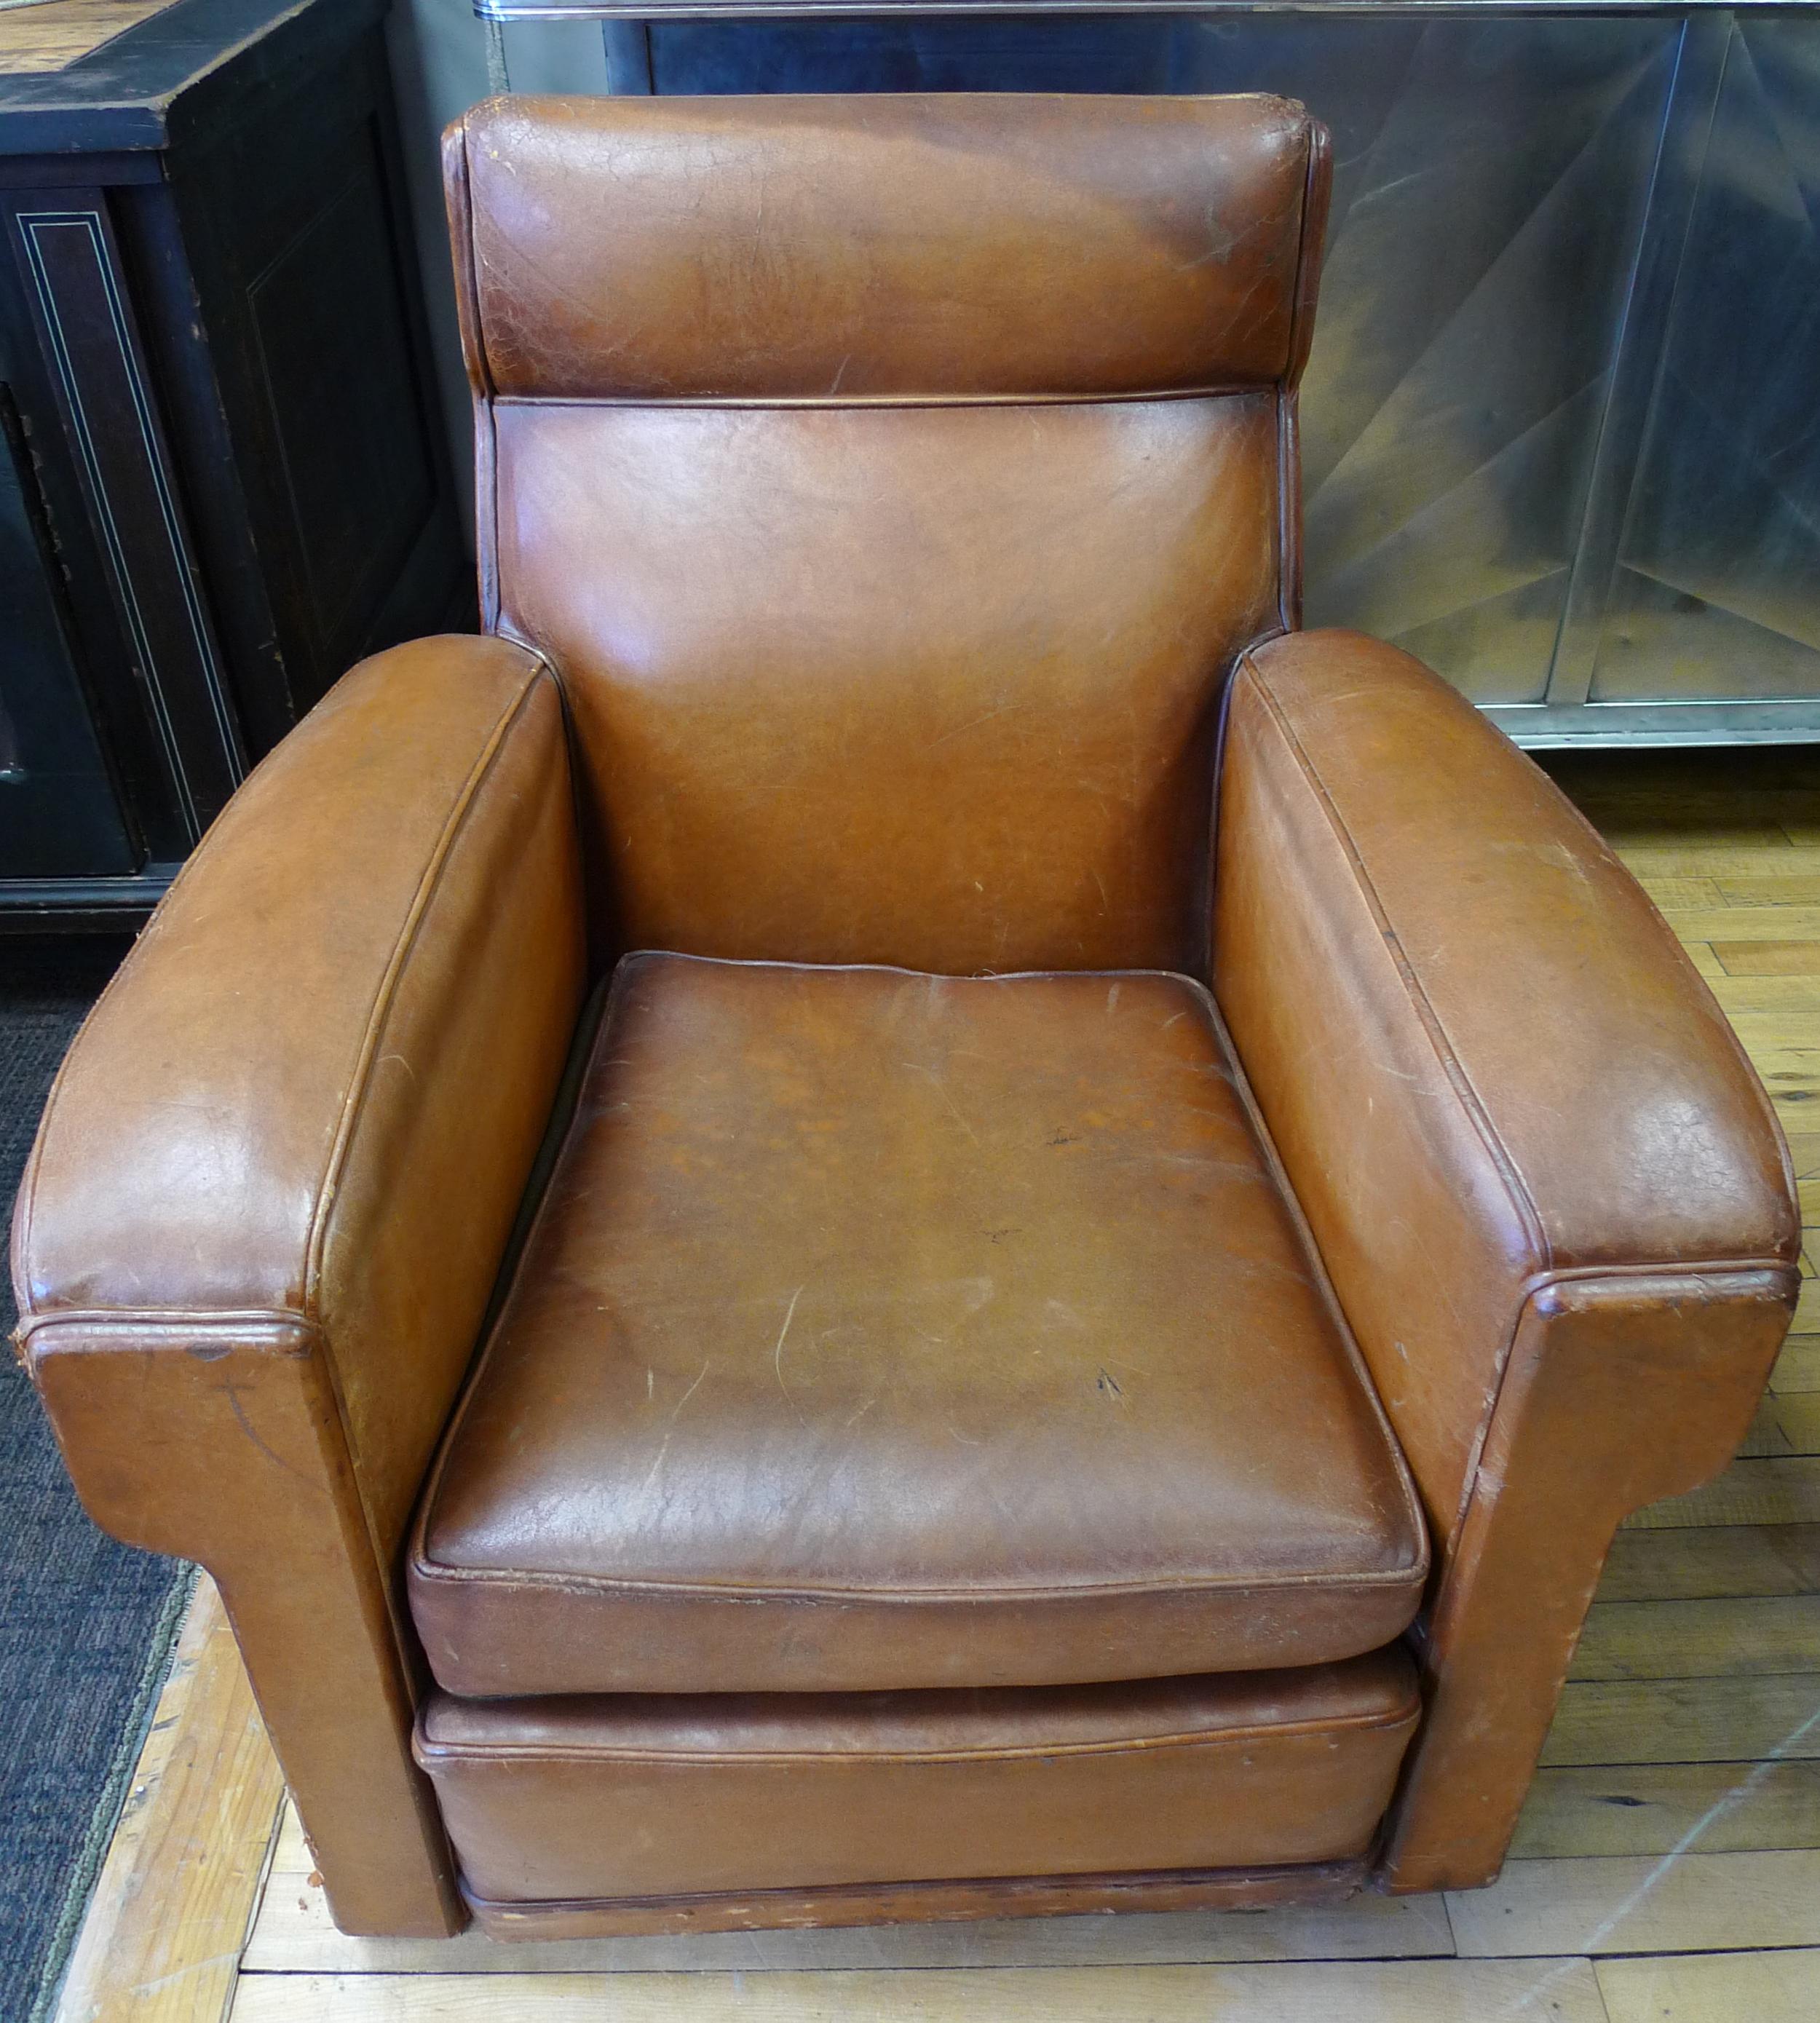 Club sofa lounge chair from France of brown leather, circa 1930s. Spring supported, seat cushion makes for deeply luxuriant seating. Patina on leather is rich to the eye and sensual to the touch of the hand. Draws you into its remarkable pedigree